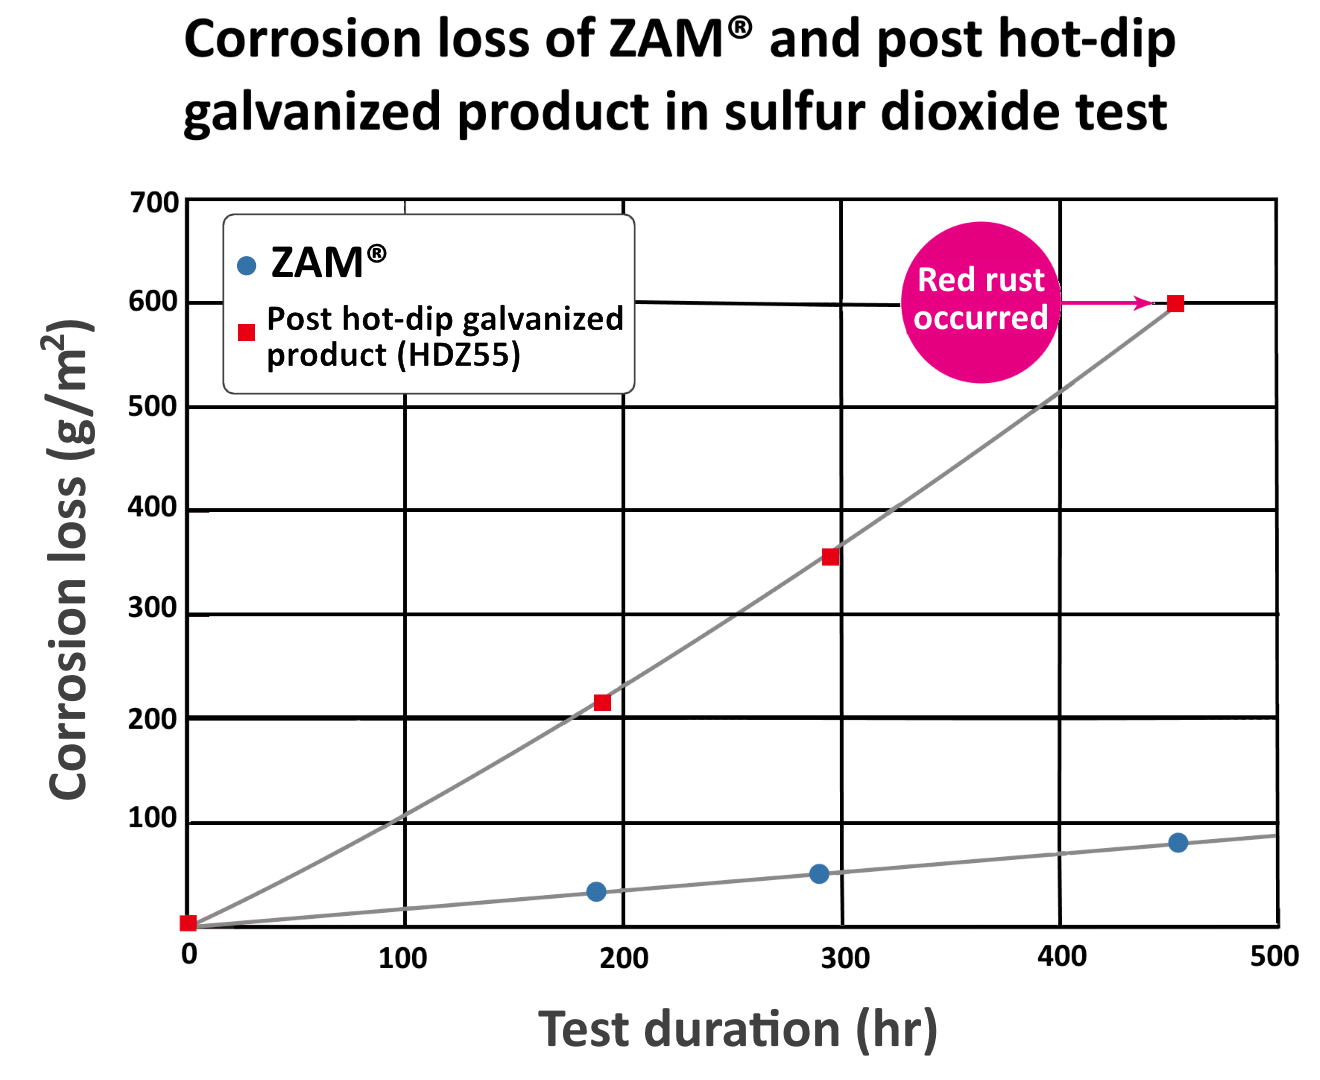 Graph showing corrosion loss of ZAM and post hot-dip galvanized product in sulfur dioxide test